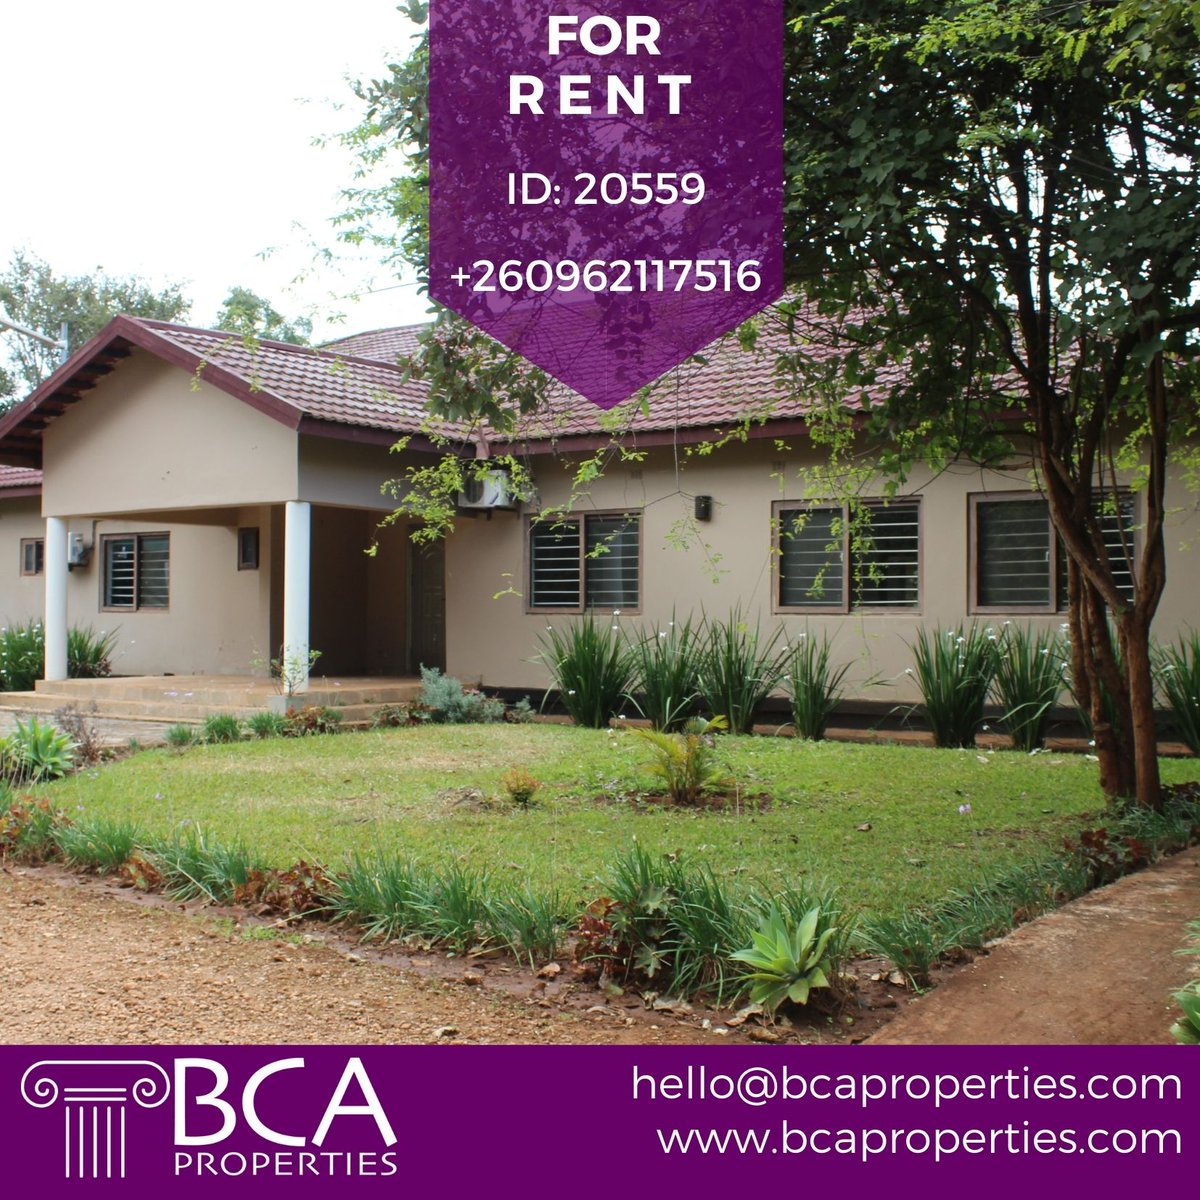 Executive 4 bedroom villa to rent in Leopards Hill
See more details 👉: bcaproperties.com/property/execu…
#bcaproperties #Zambia #property #realestate #realestatelife #letsguide #ExecutiveHomes #LeopardsHill #LusakaZambia #fridayvibes